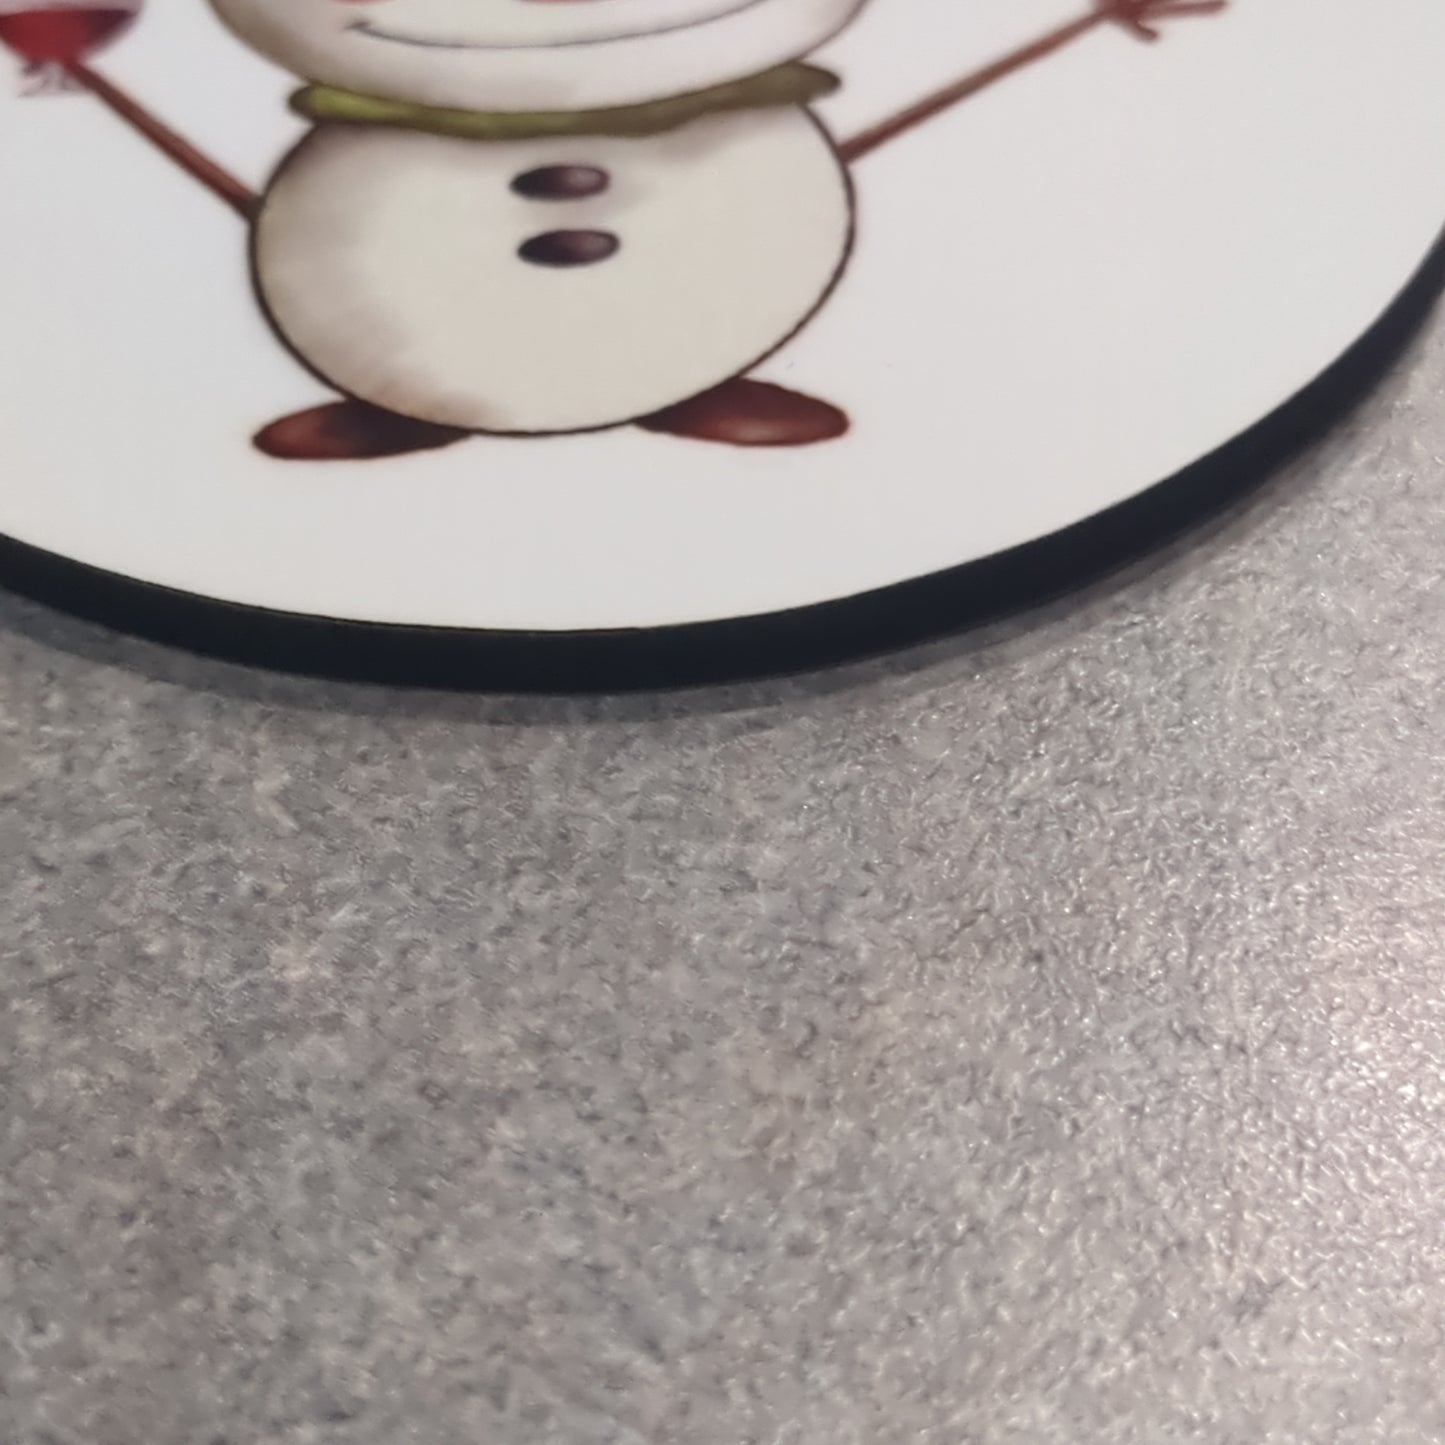 MDF ornament snowman with a wine glass